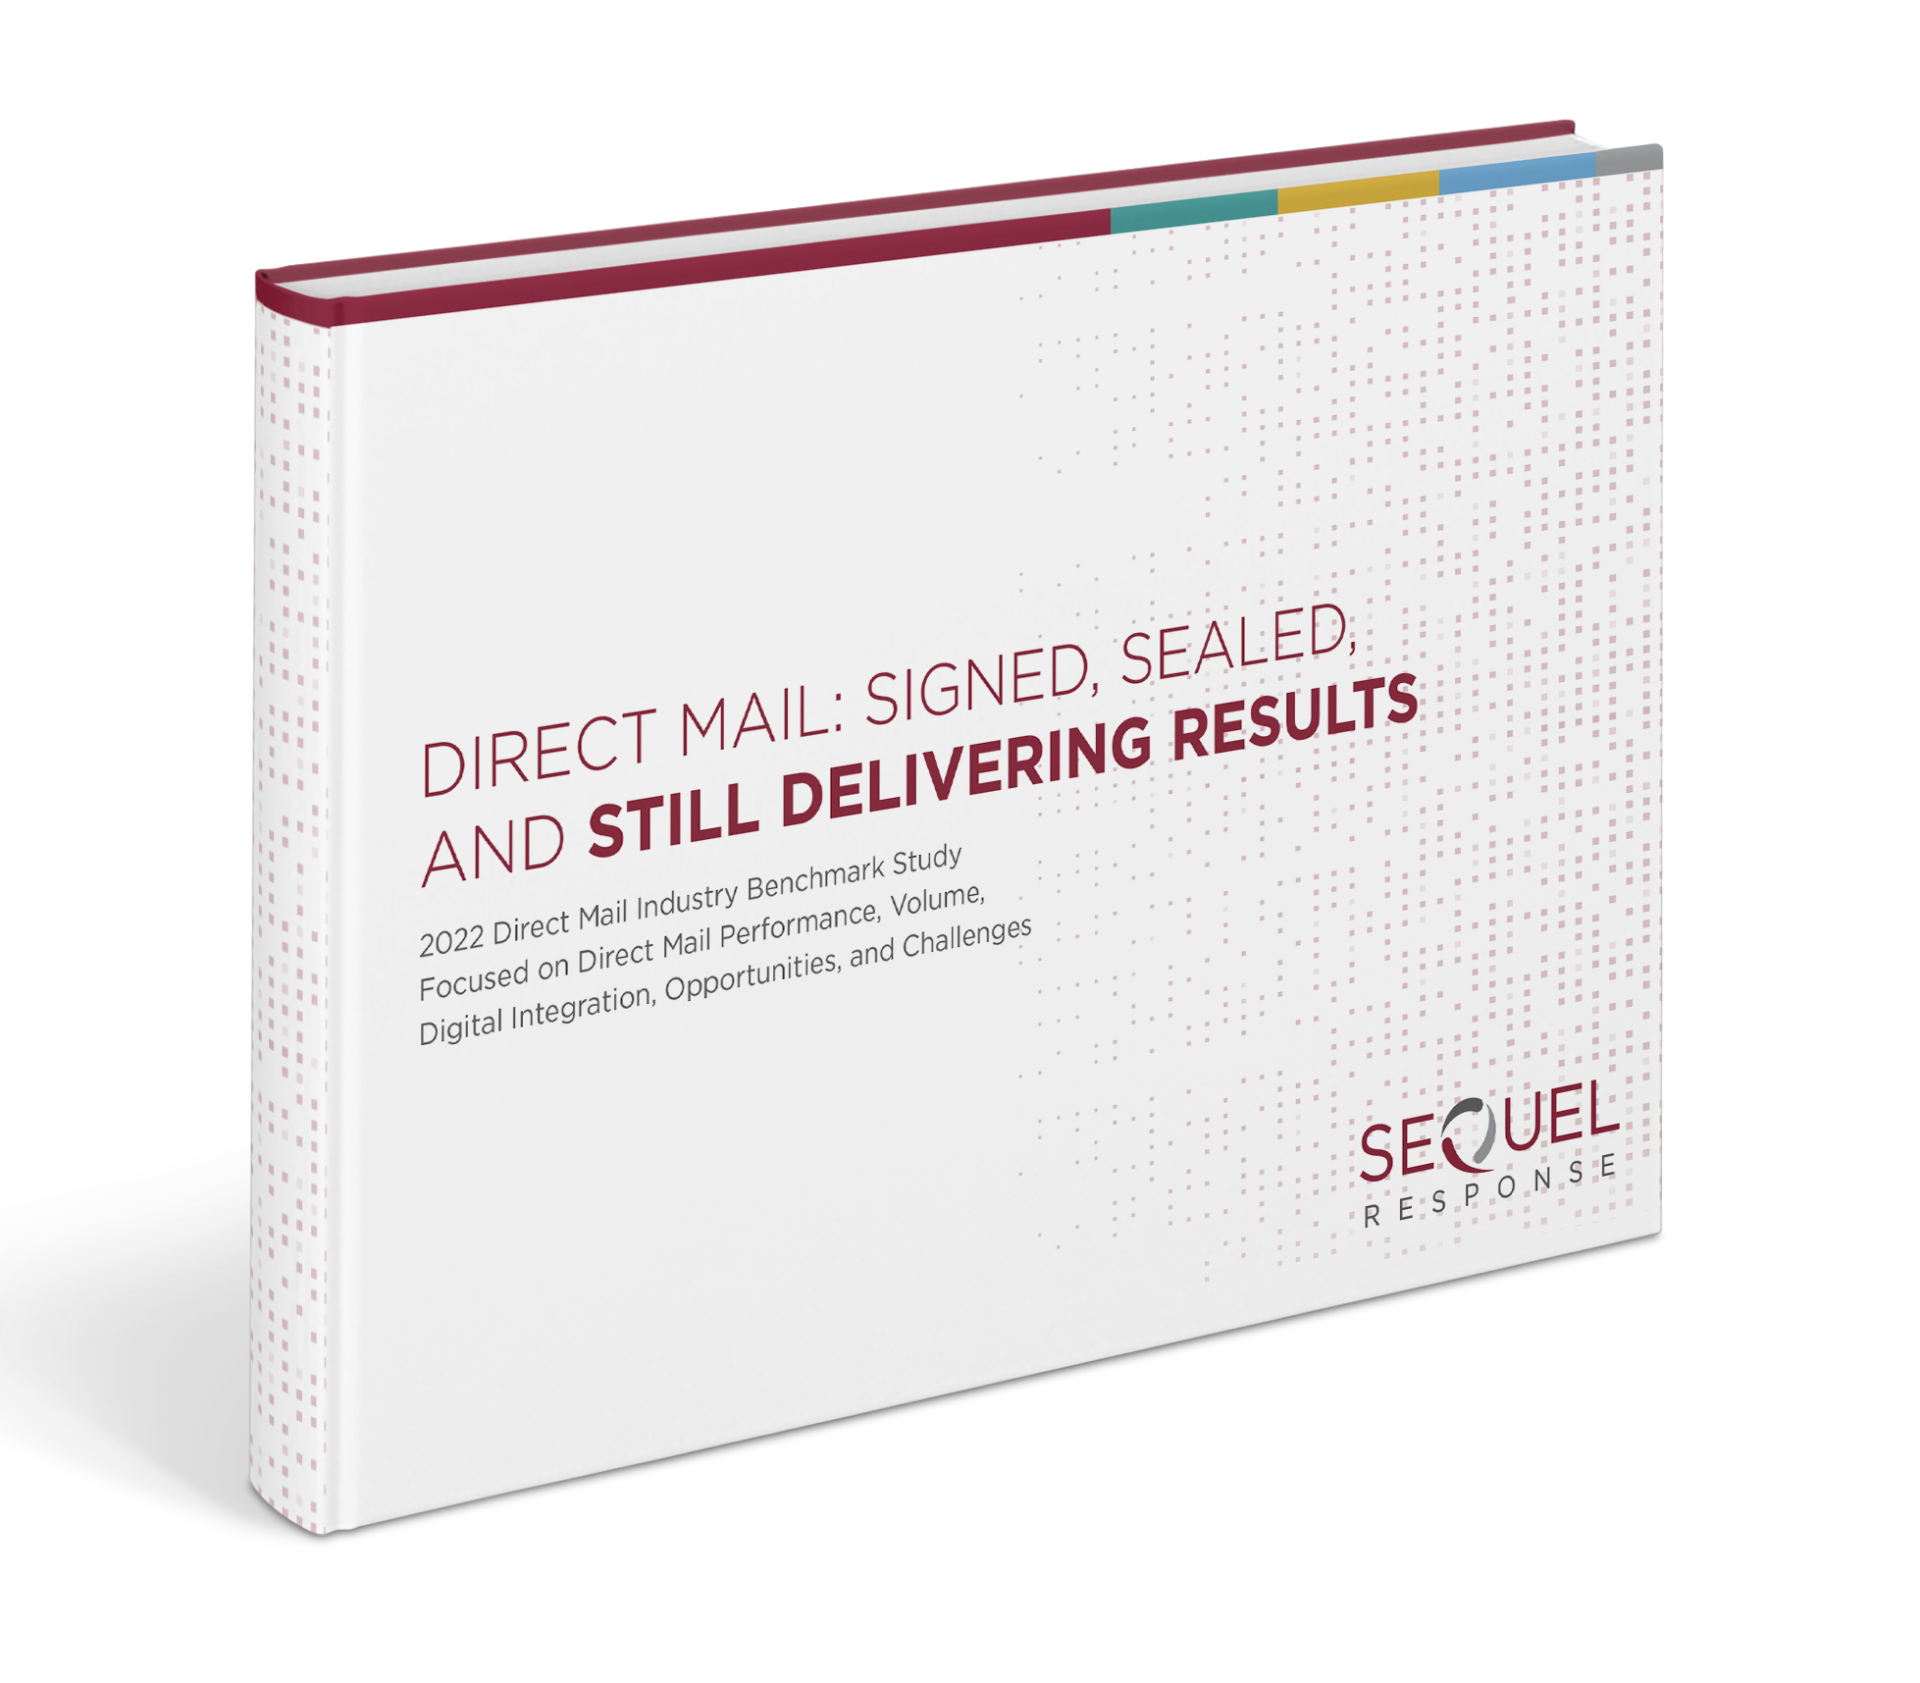 Direct Mail Industry Benchmark Report 2022